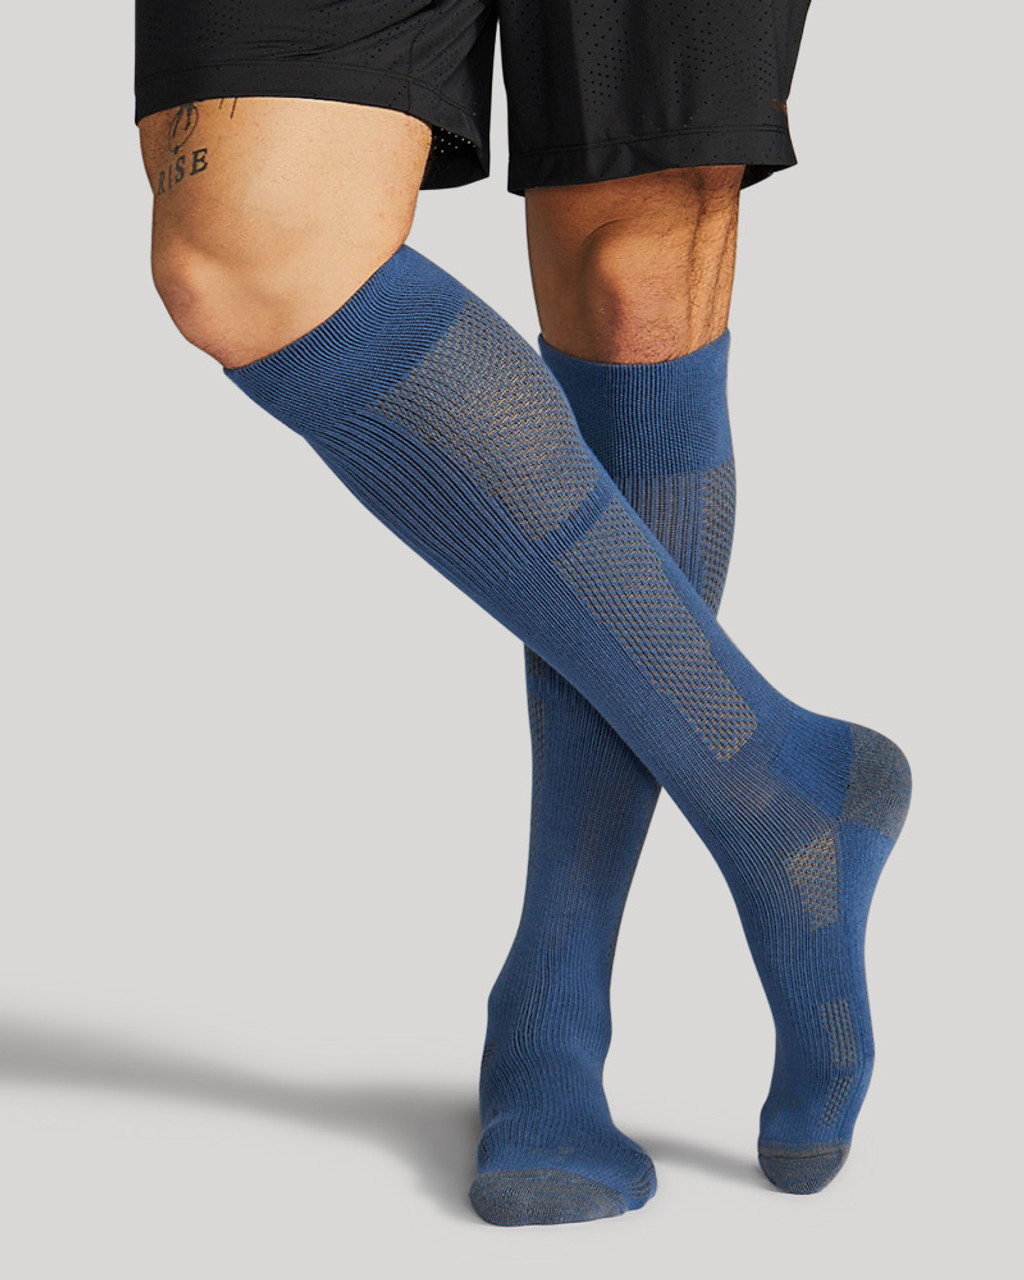 Compression stockings for men